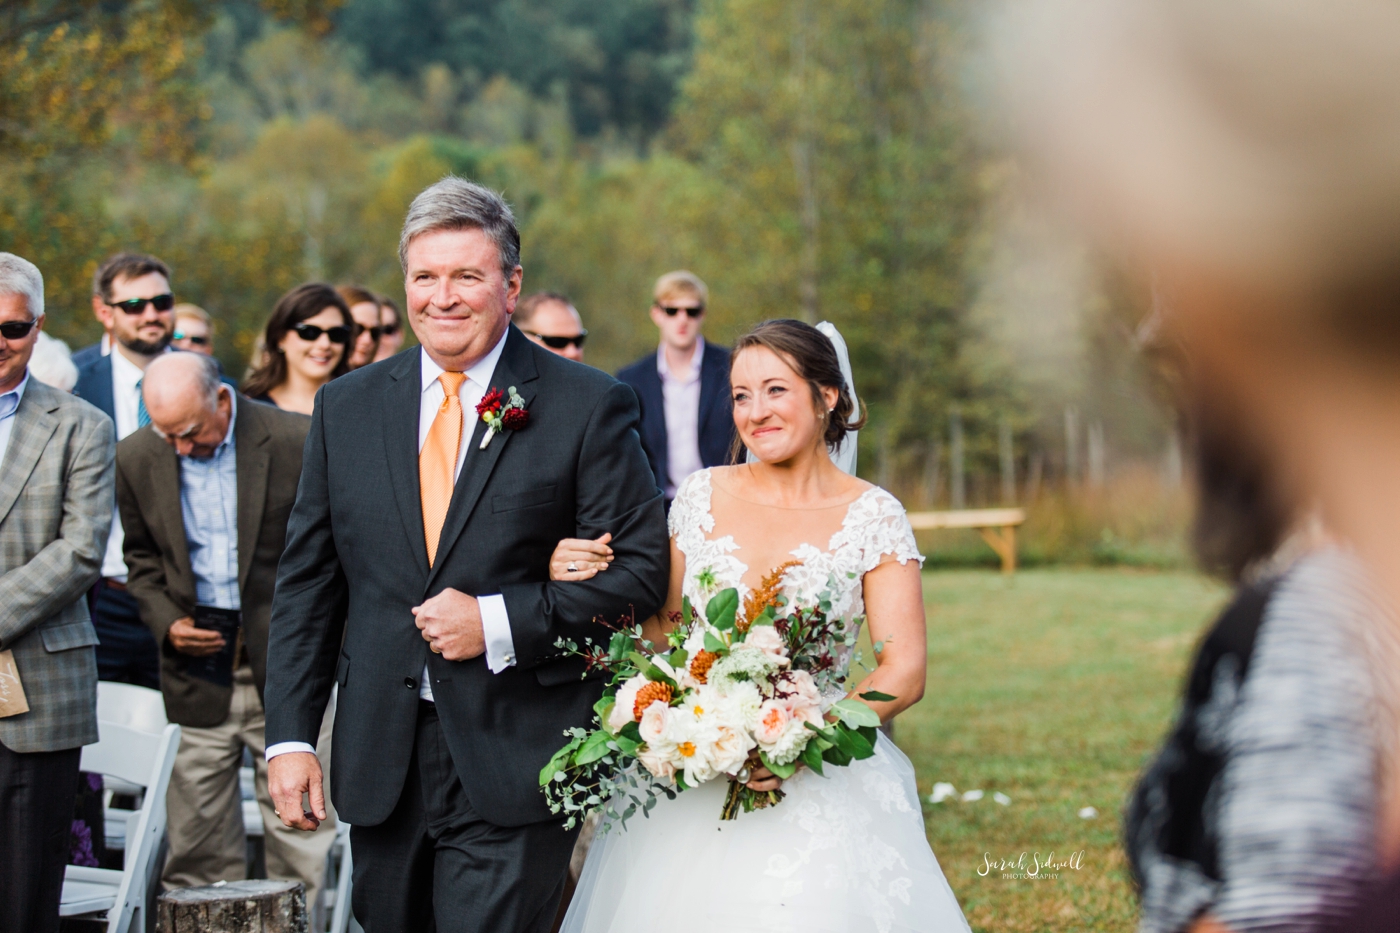 A father walks his daughter down the aisle for her wedding. 